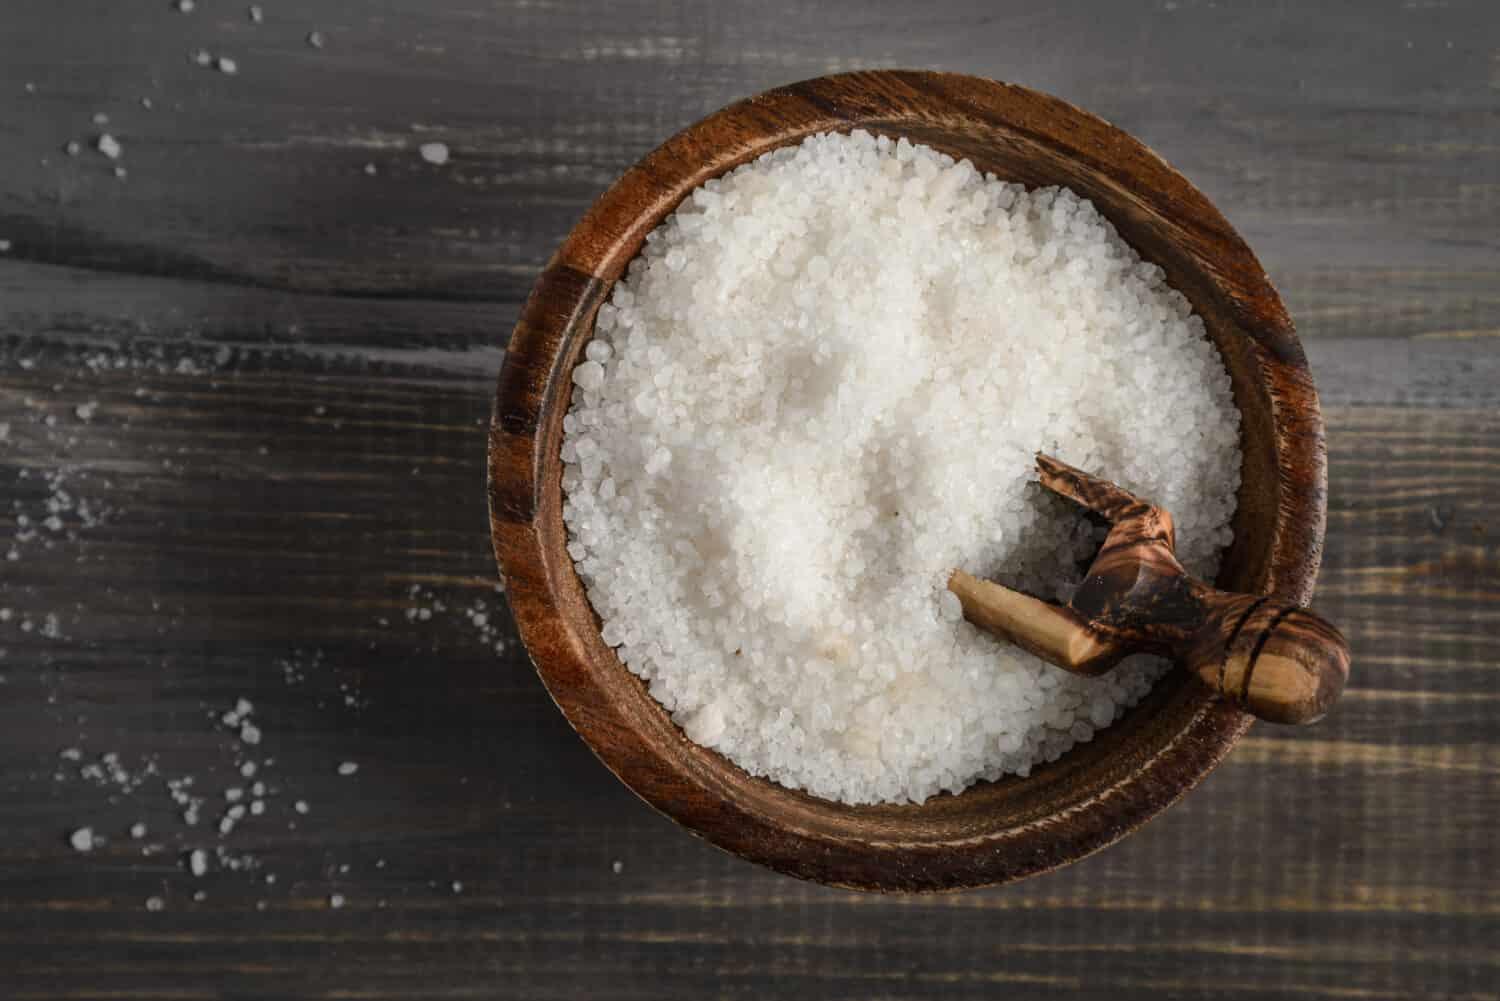 Kosher salt in a wooden bowl with a wooden spoon on a rustic wooden background